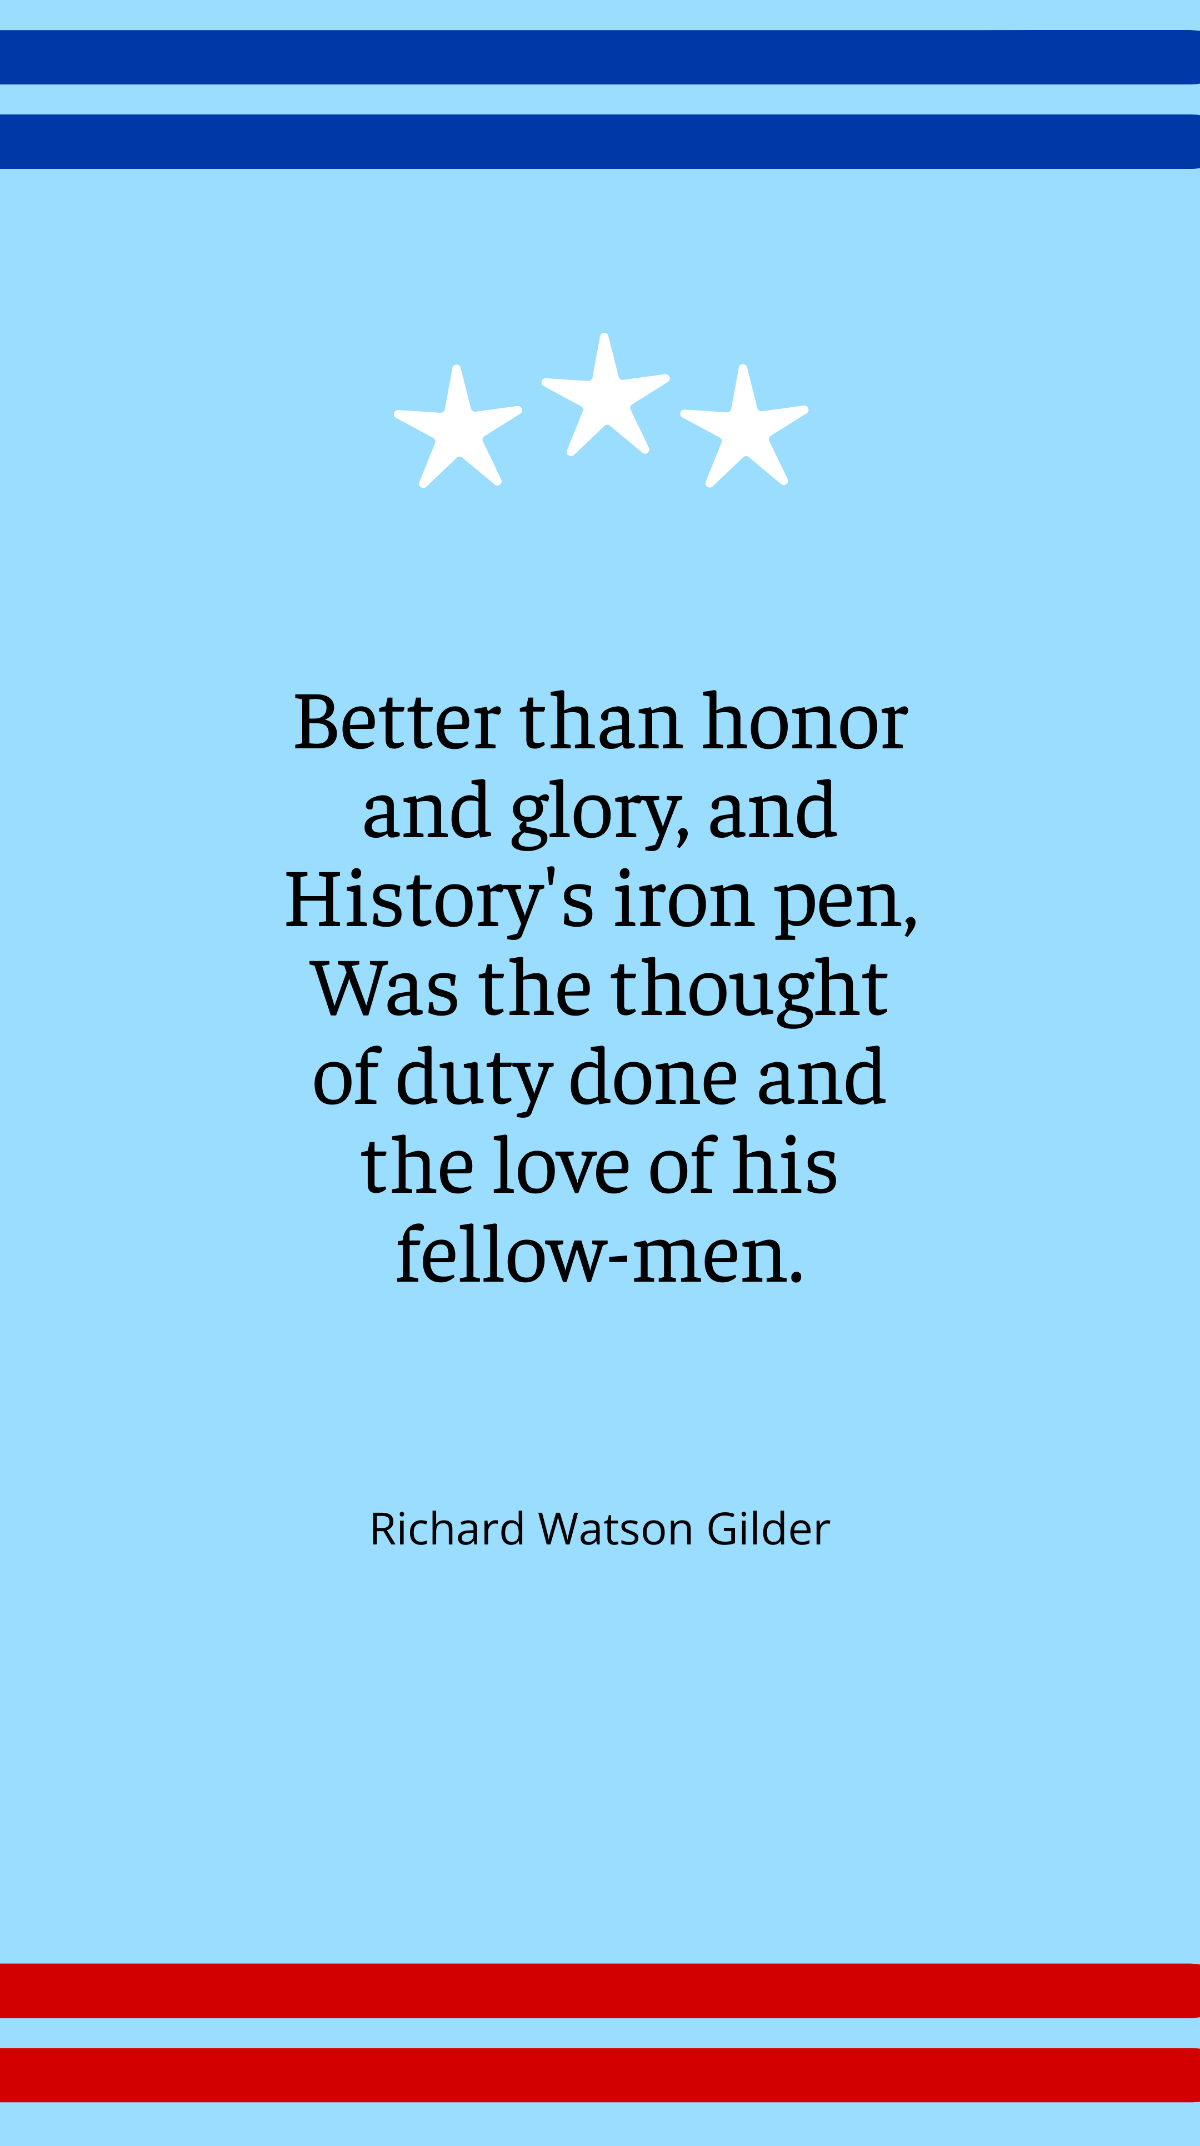 Richard Watson Gilder - Better than honor and glory, and History's iron pen, Was the thought of duty done and the love of his fellow-men.